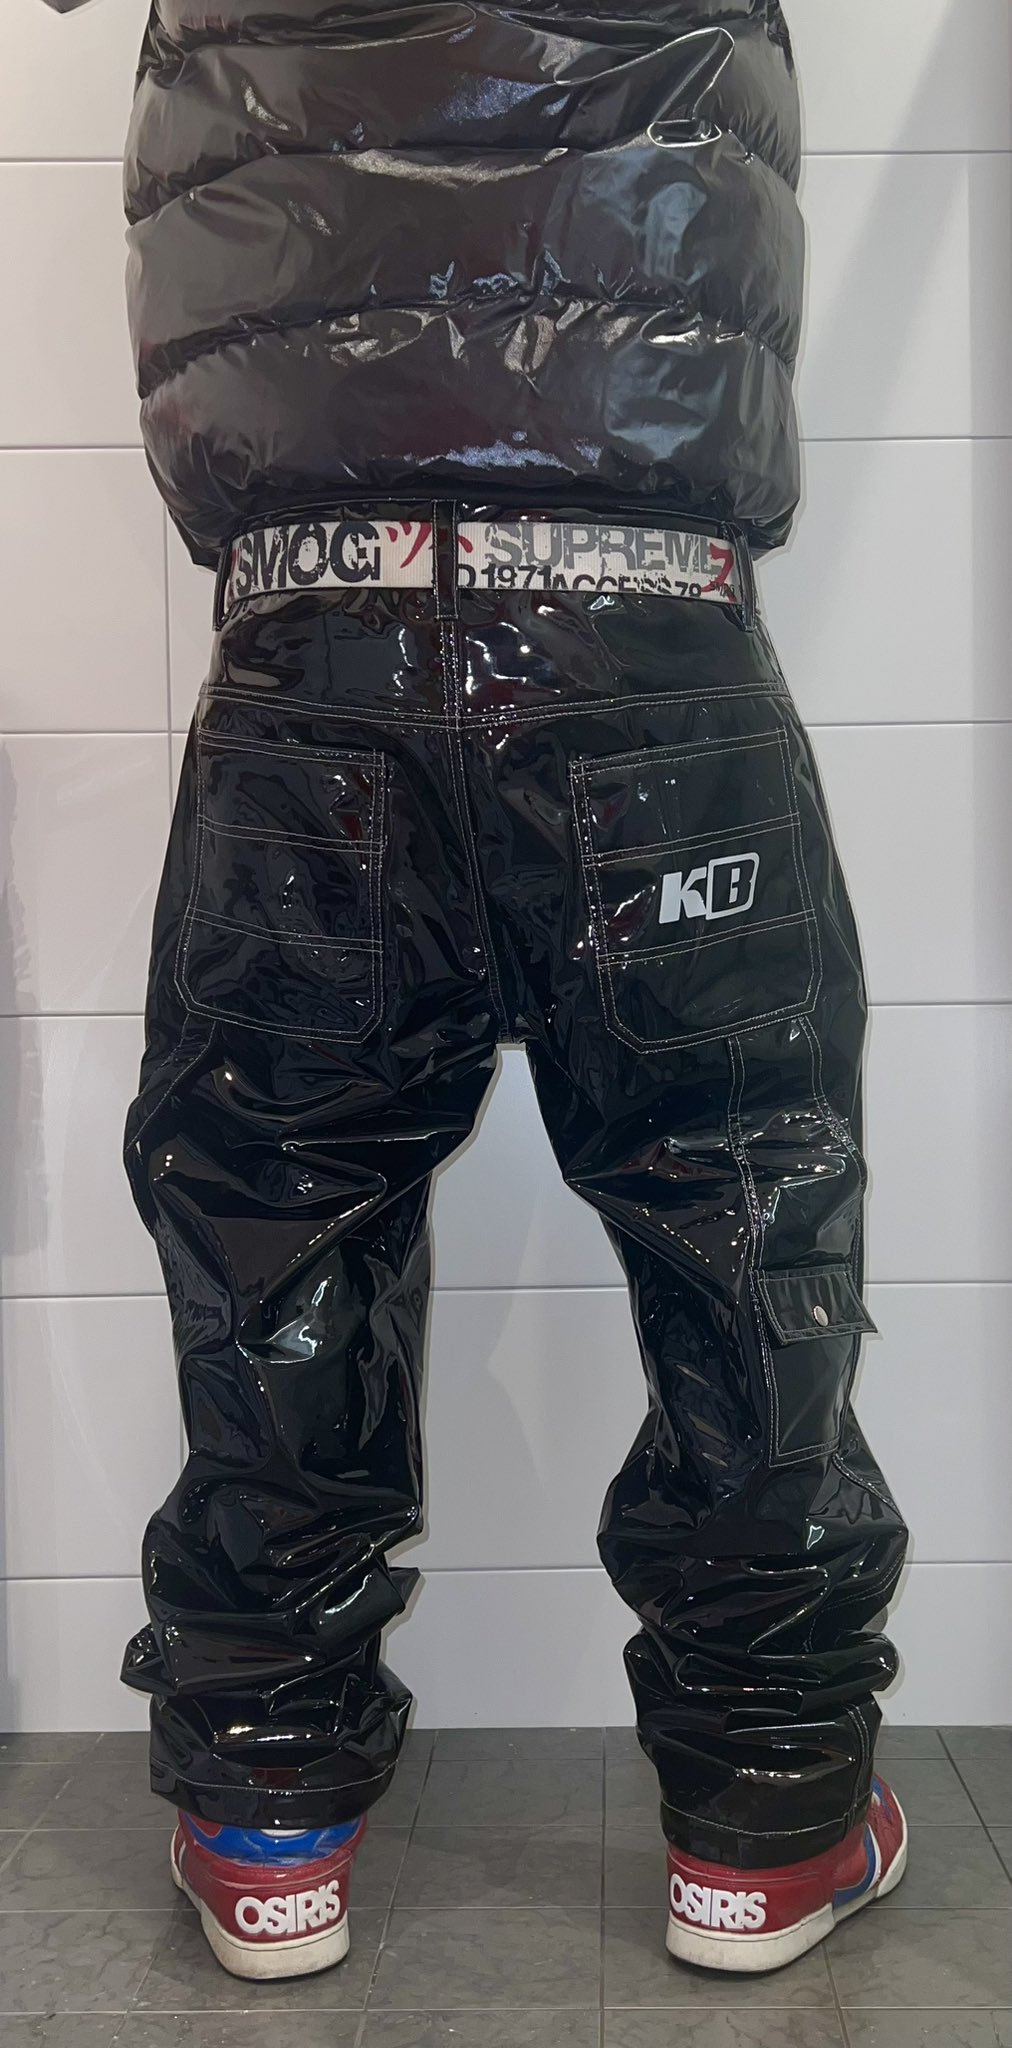 AdidasWanker on X: "Finally my @karabro912997 shiny baggy jeans arrived  today! First impressions are awesome shine and quality, feels really nice  to wear! There will be more pics of these count on